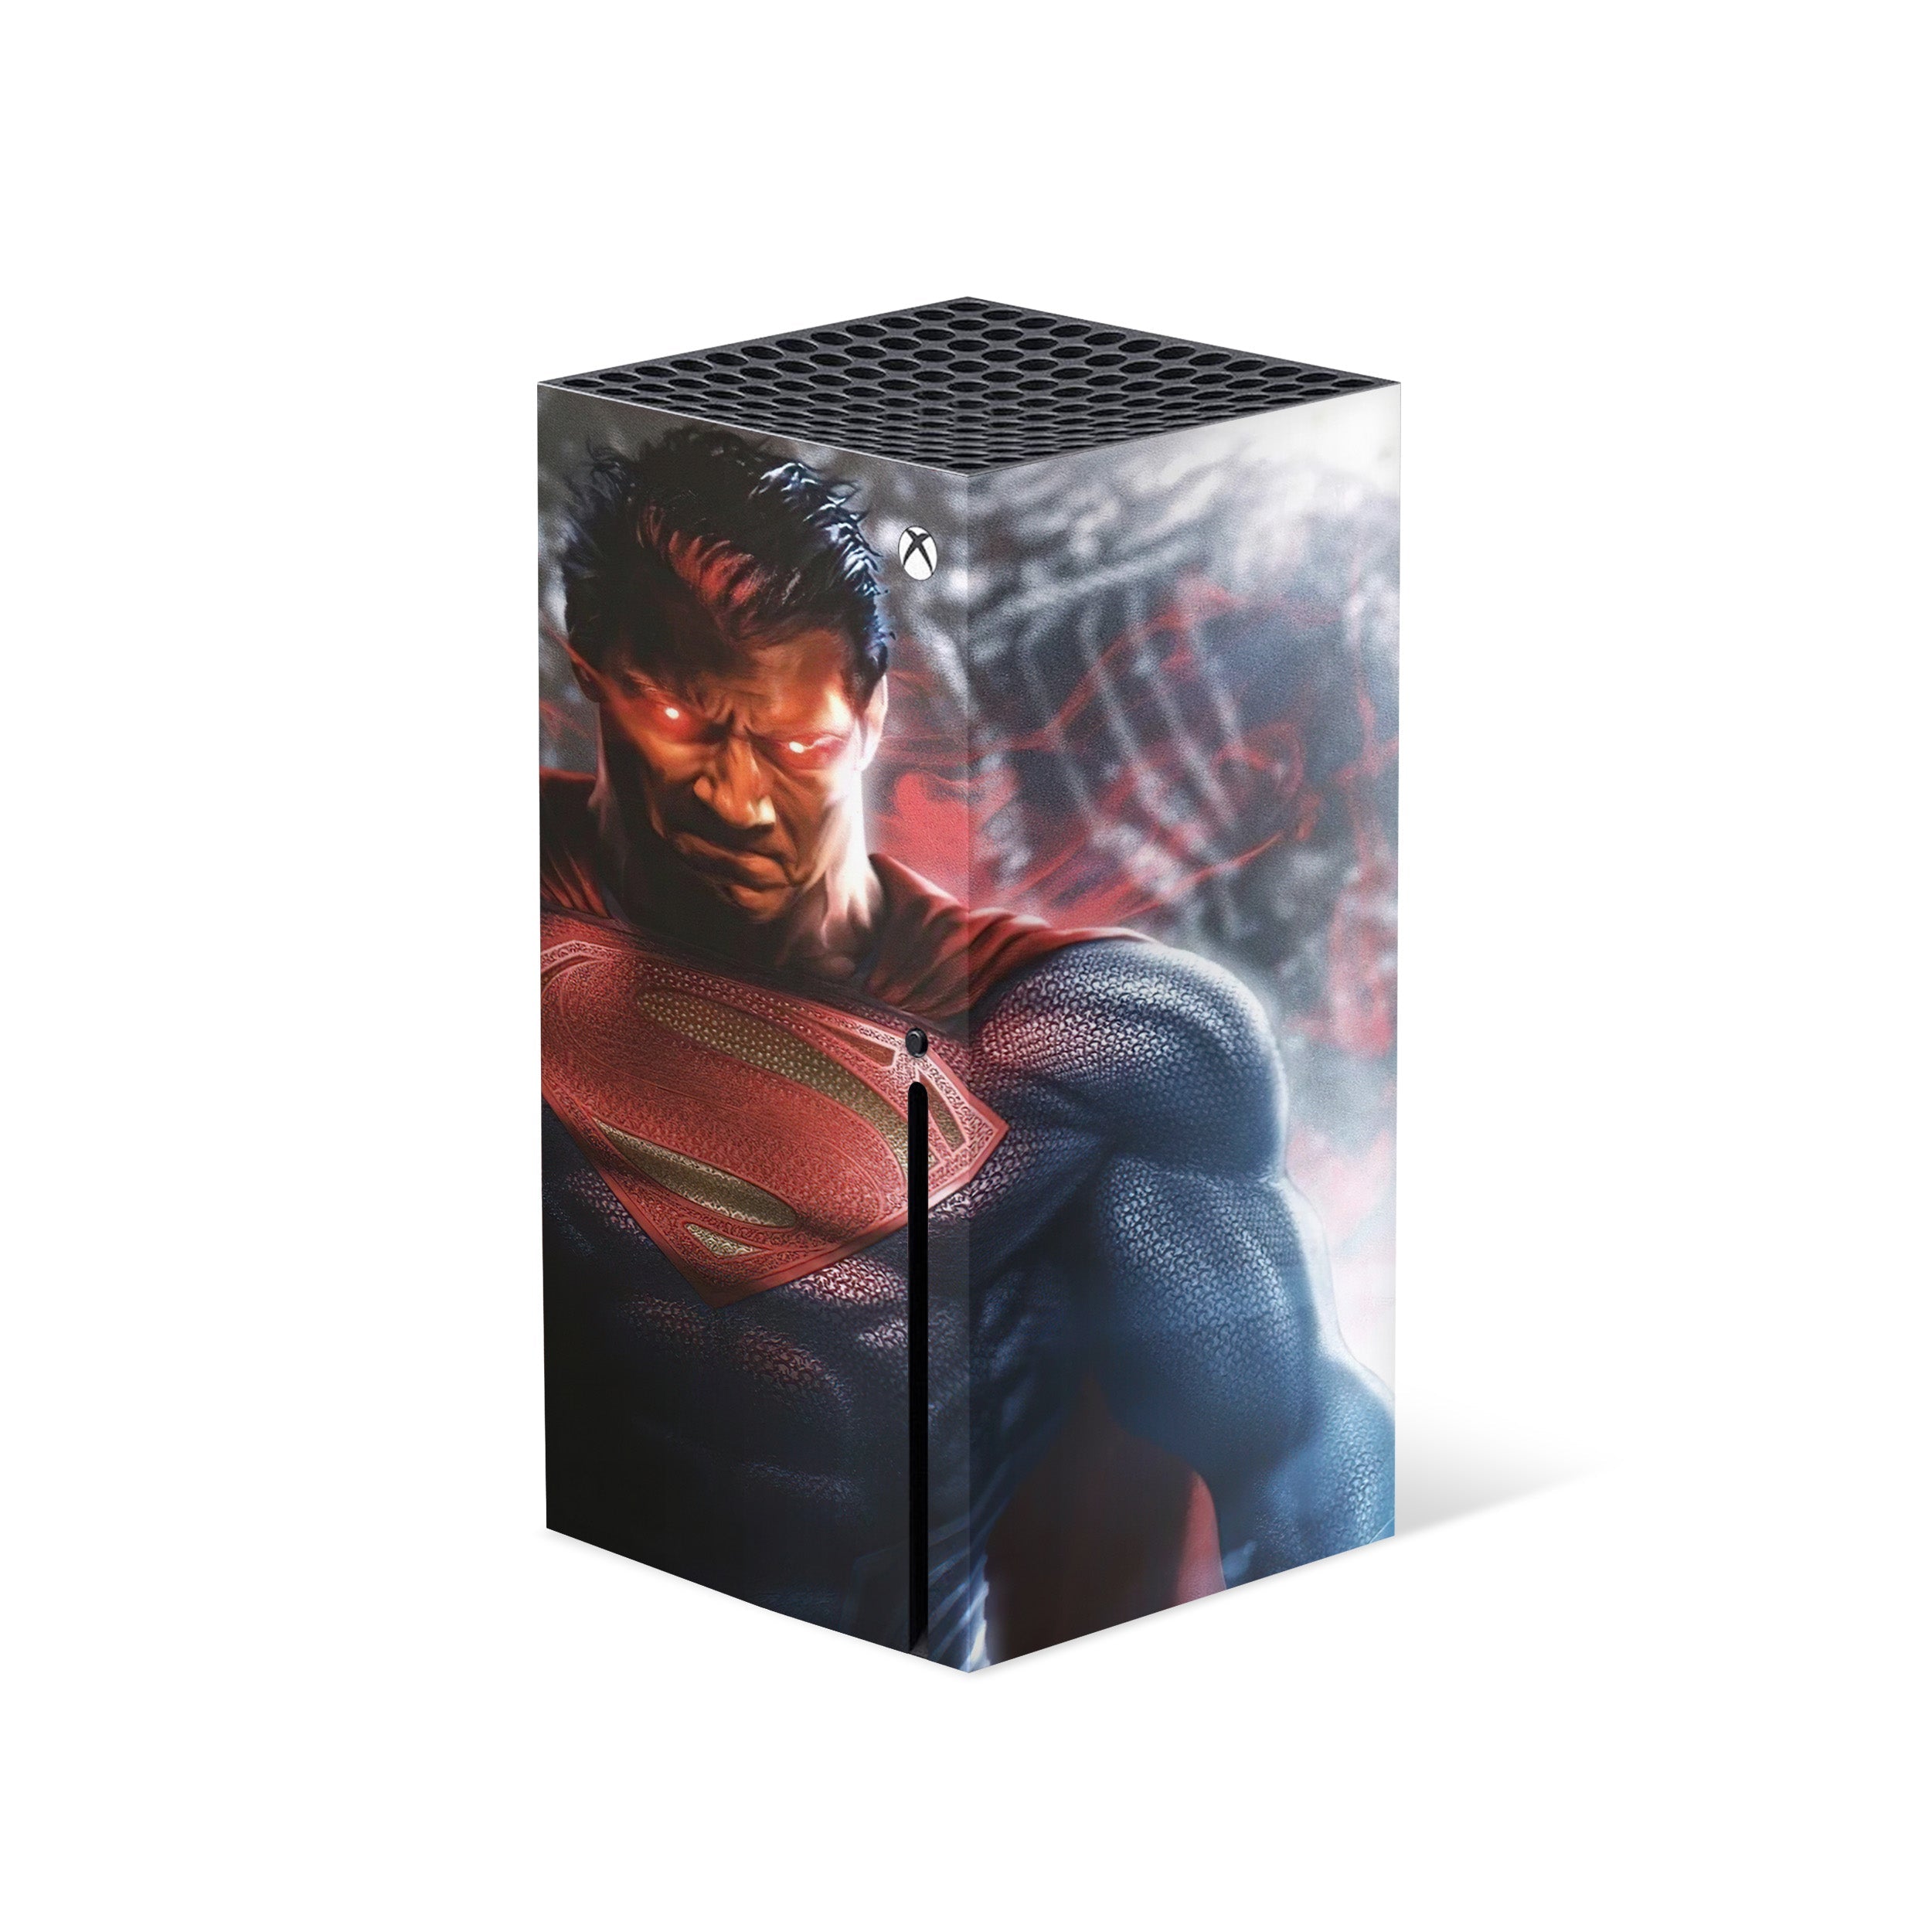 A video game skin featuring a DC Comics Superman design for the Xbox Series X.